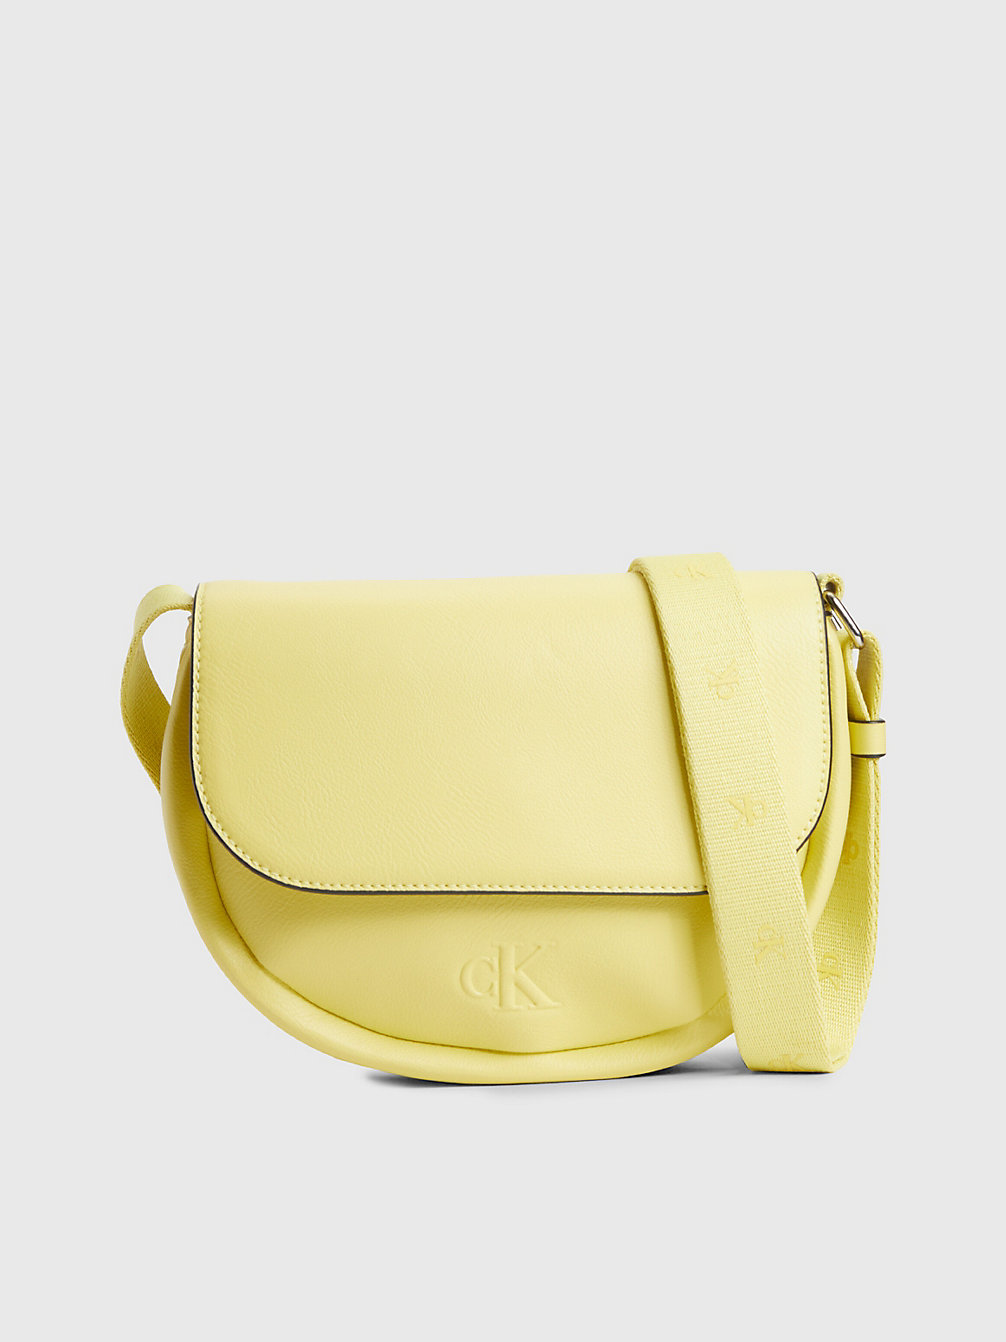 YELLOW SAND Recycled Round Crossbody Bag undefined women Calvin Klein